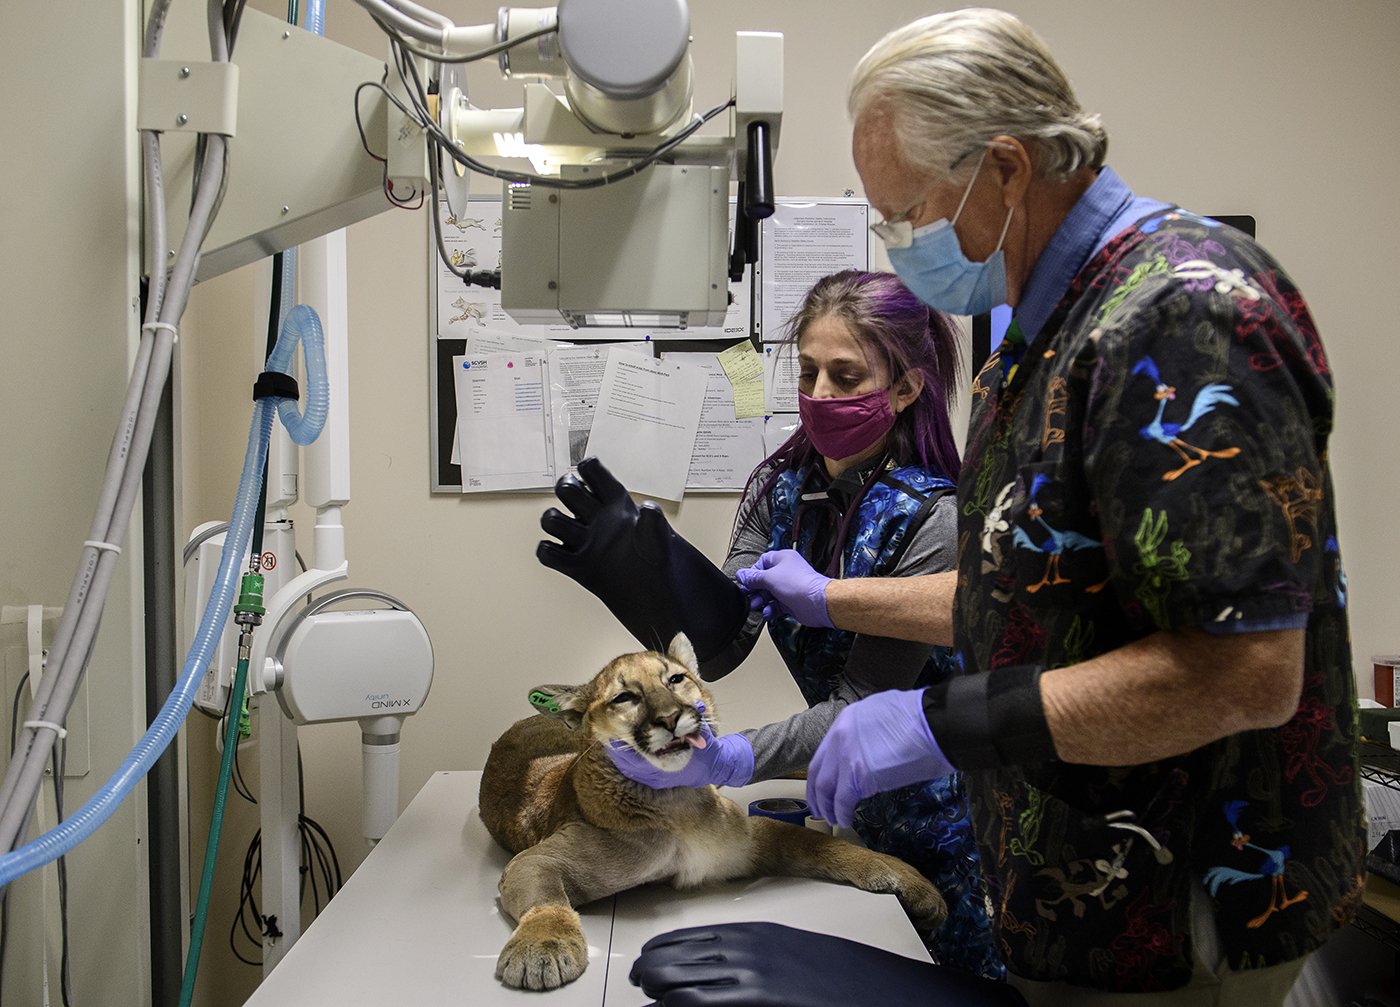  Lauren Genger, a licensed veterinary technician, and Veterinarian Scott Weldy, work on an anesthetized mountain lion cub last year after he was struck by a car on the 241 toll road. The animal was injured too badly to be released back into the wild.